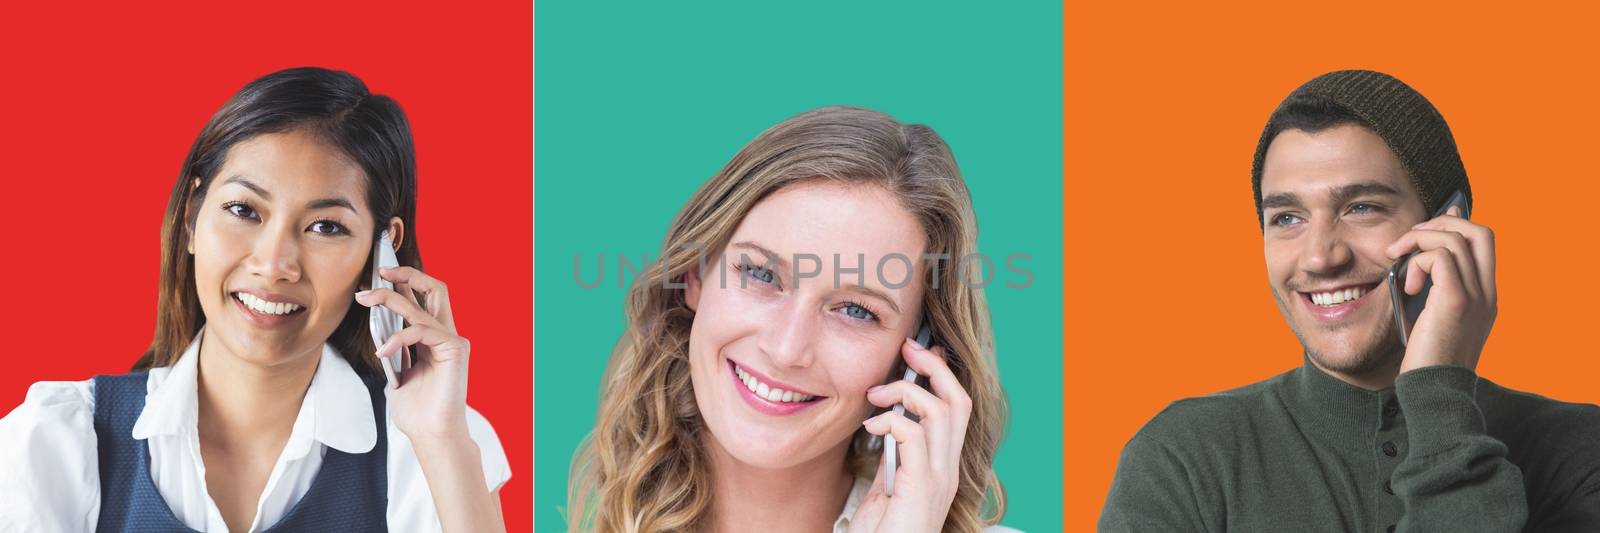 Digital composite of People on phones in colorful square sections